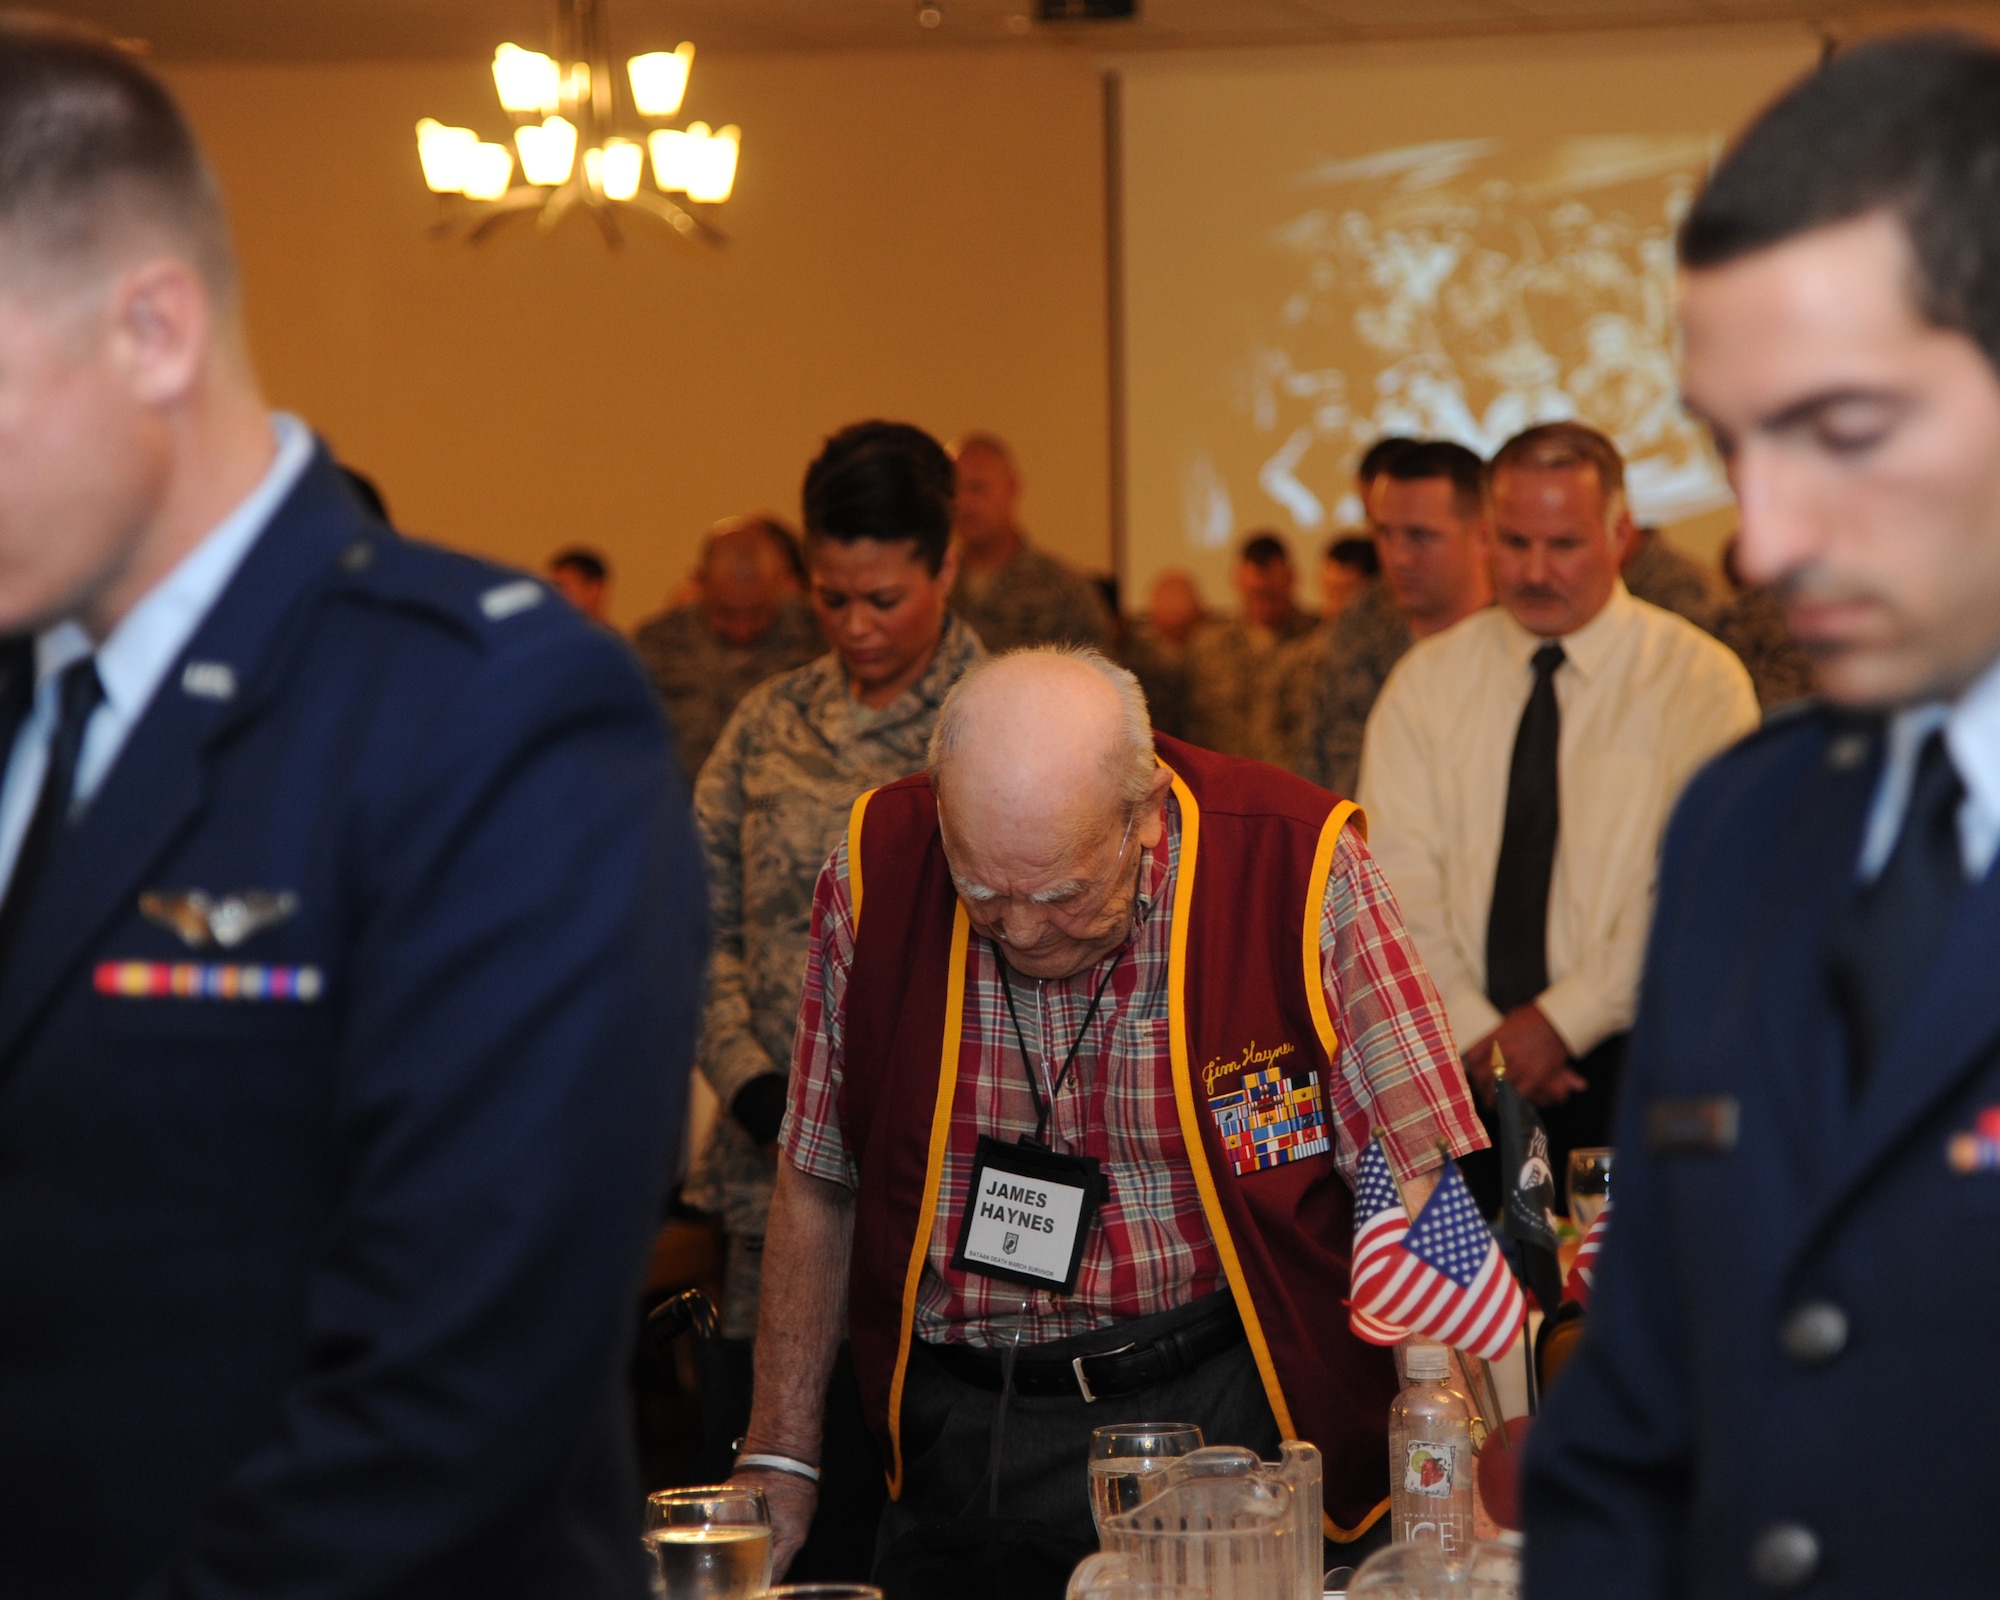 Bataan Death March survivor Master Sgt. James Haynes, U.S. Army Air Force, bows his head during the invocation at the 70th Anniversary luncheon held on Barksdale Air Force Base, La., Sept. 4 in honor of the time Haynes and four other veterans spent as prisoners of war during World War II. This day was significant because it also marked the 67th Anniversary of over 2,000 Japanese soldiers surrendering on Wake Island two days after the formal surrender of Japan. (U.S. Air Force photo/Airman 1st Class Joseph A. Pagán Jr.)(RELEASED)